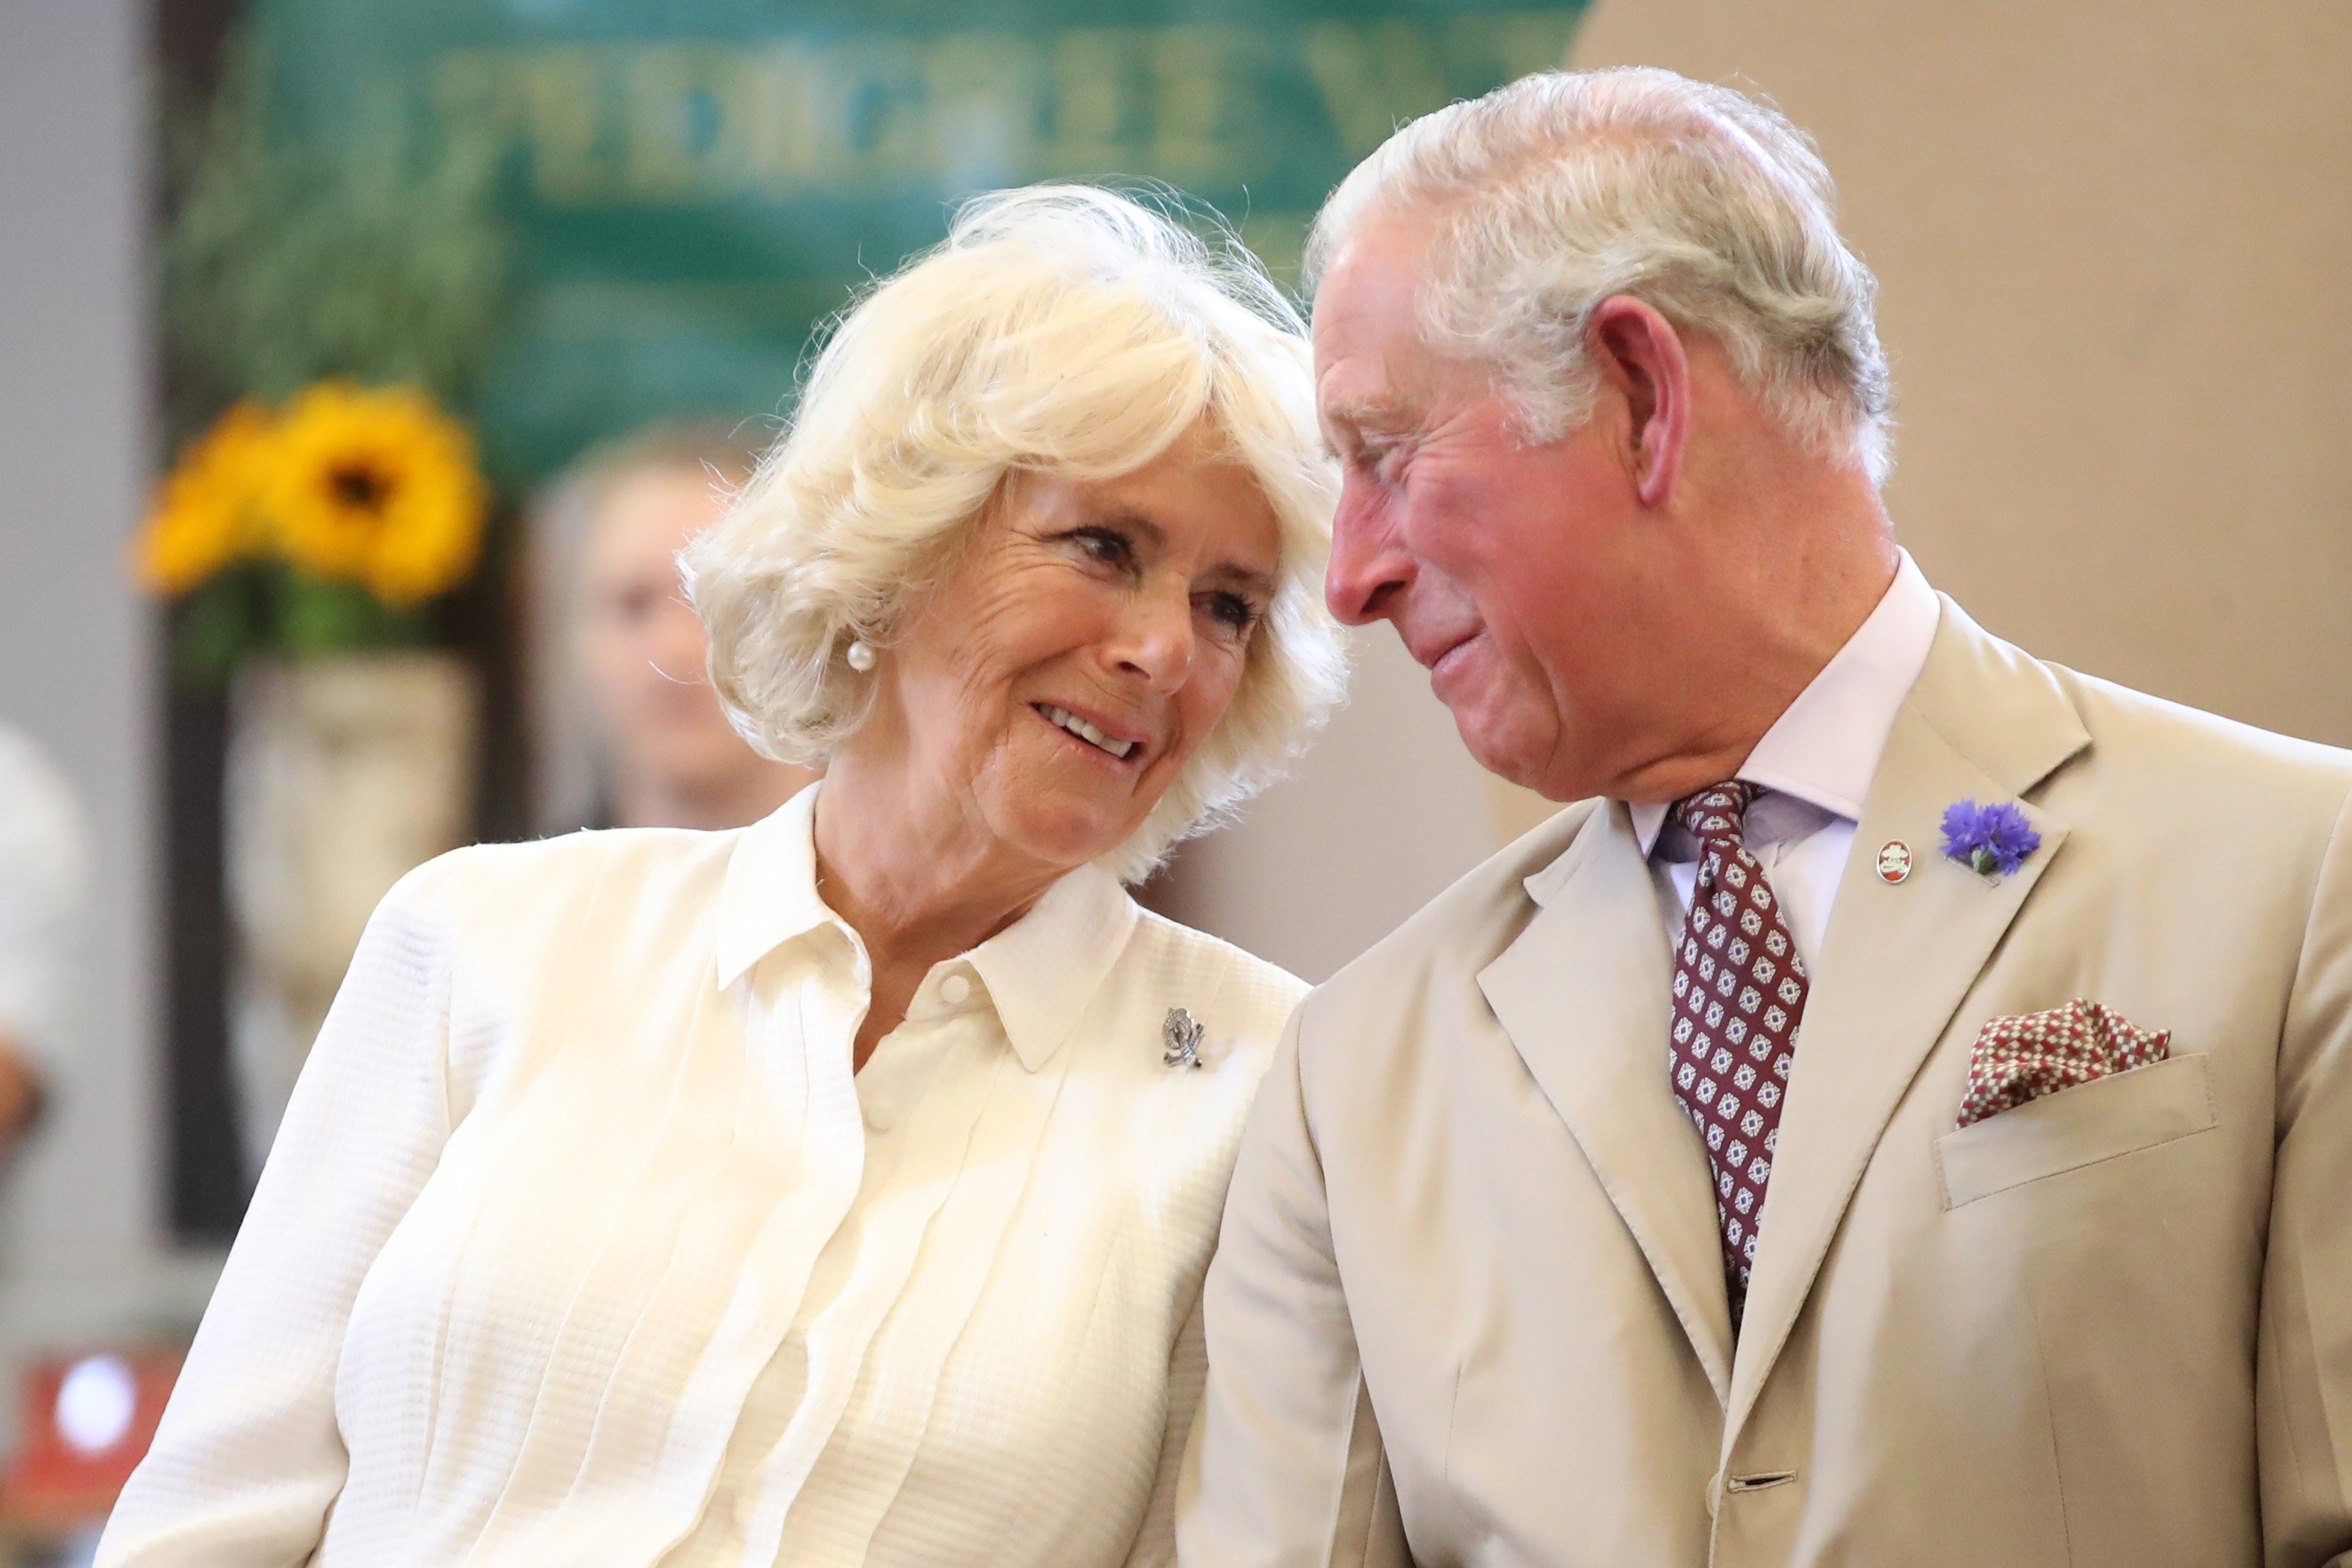 Royal Biographer Says Camilla Parker Bowles Became Queen Consort After an ‘Arrangement’ King Charles Made With Queen Elizabeth II